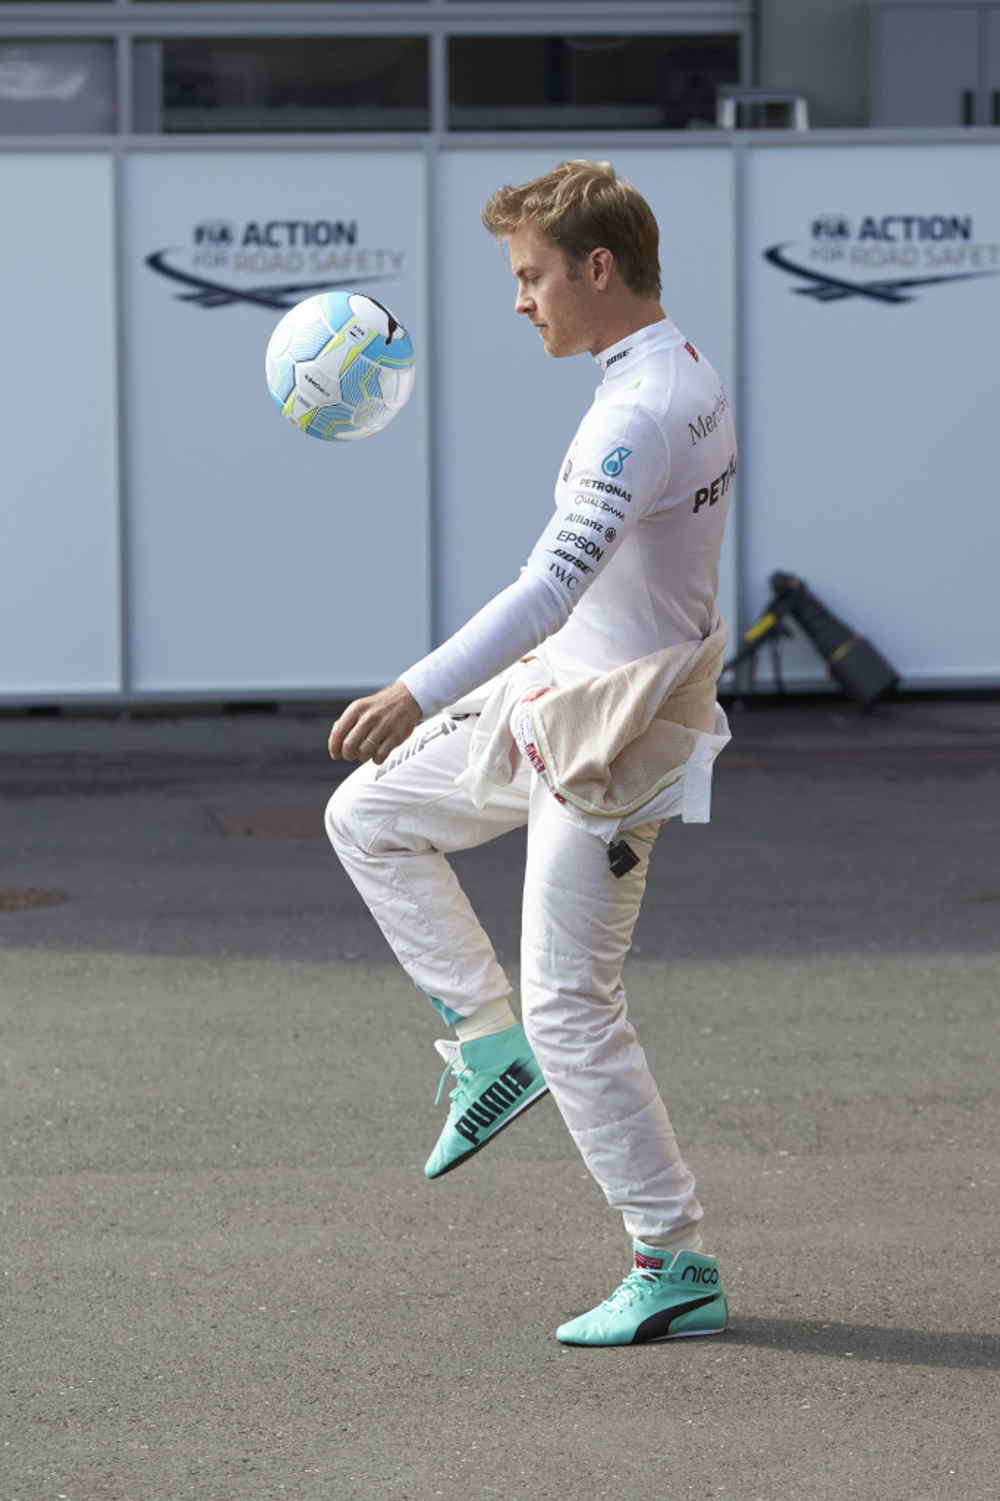 Rosberg Focusing on football just before the race